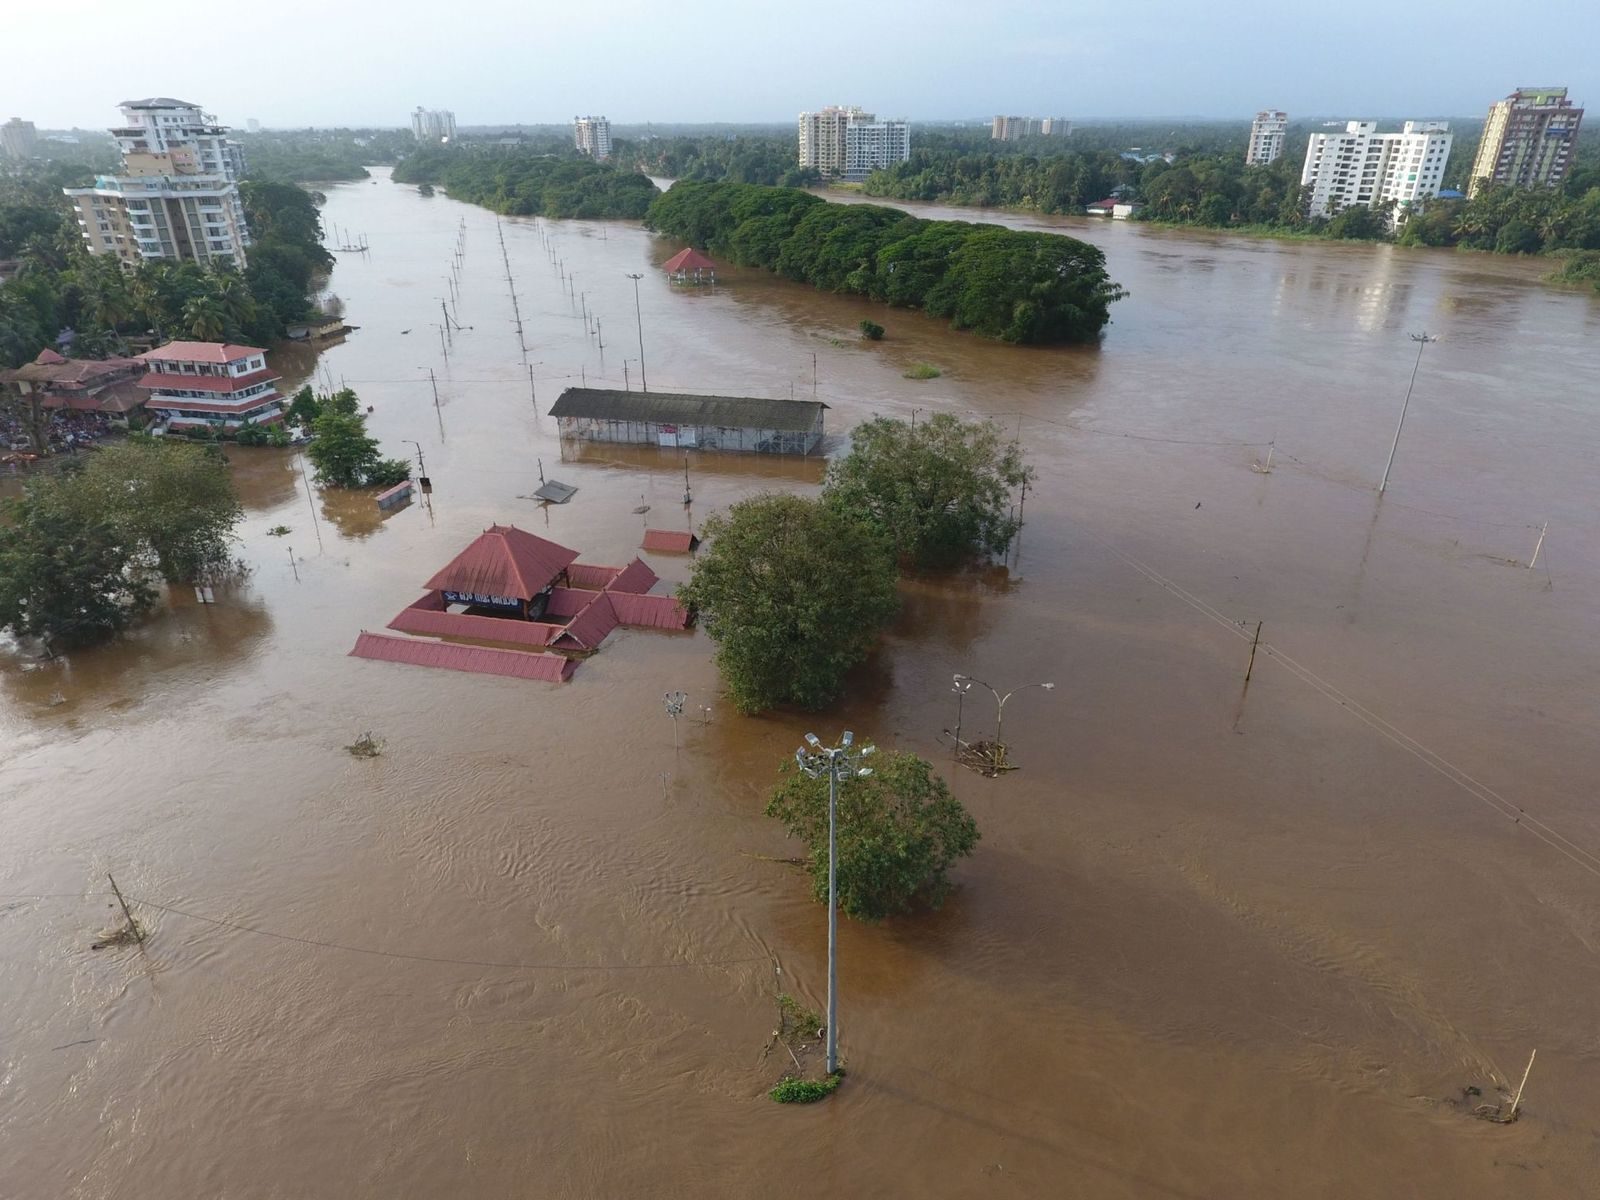 The Shiva Temple in Kochi was submerged when water was released from a dam